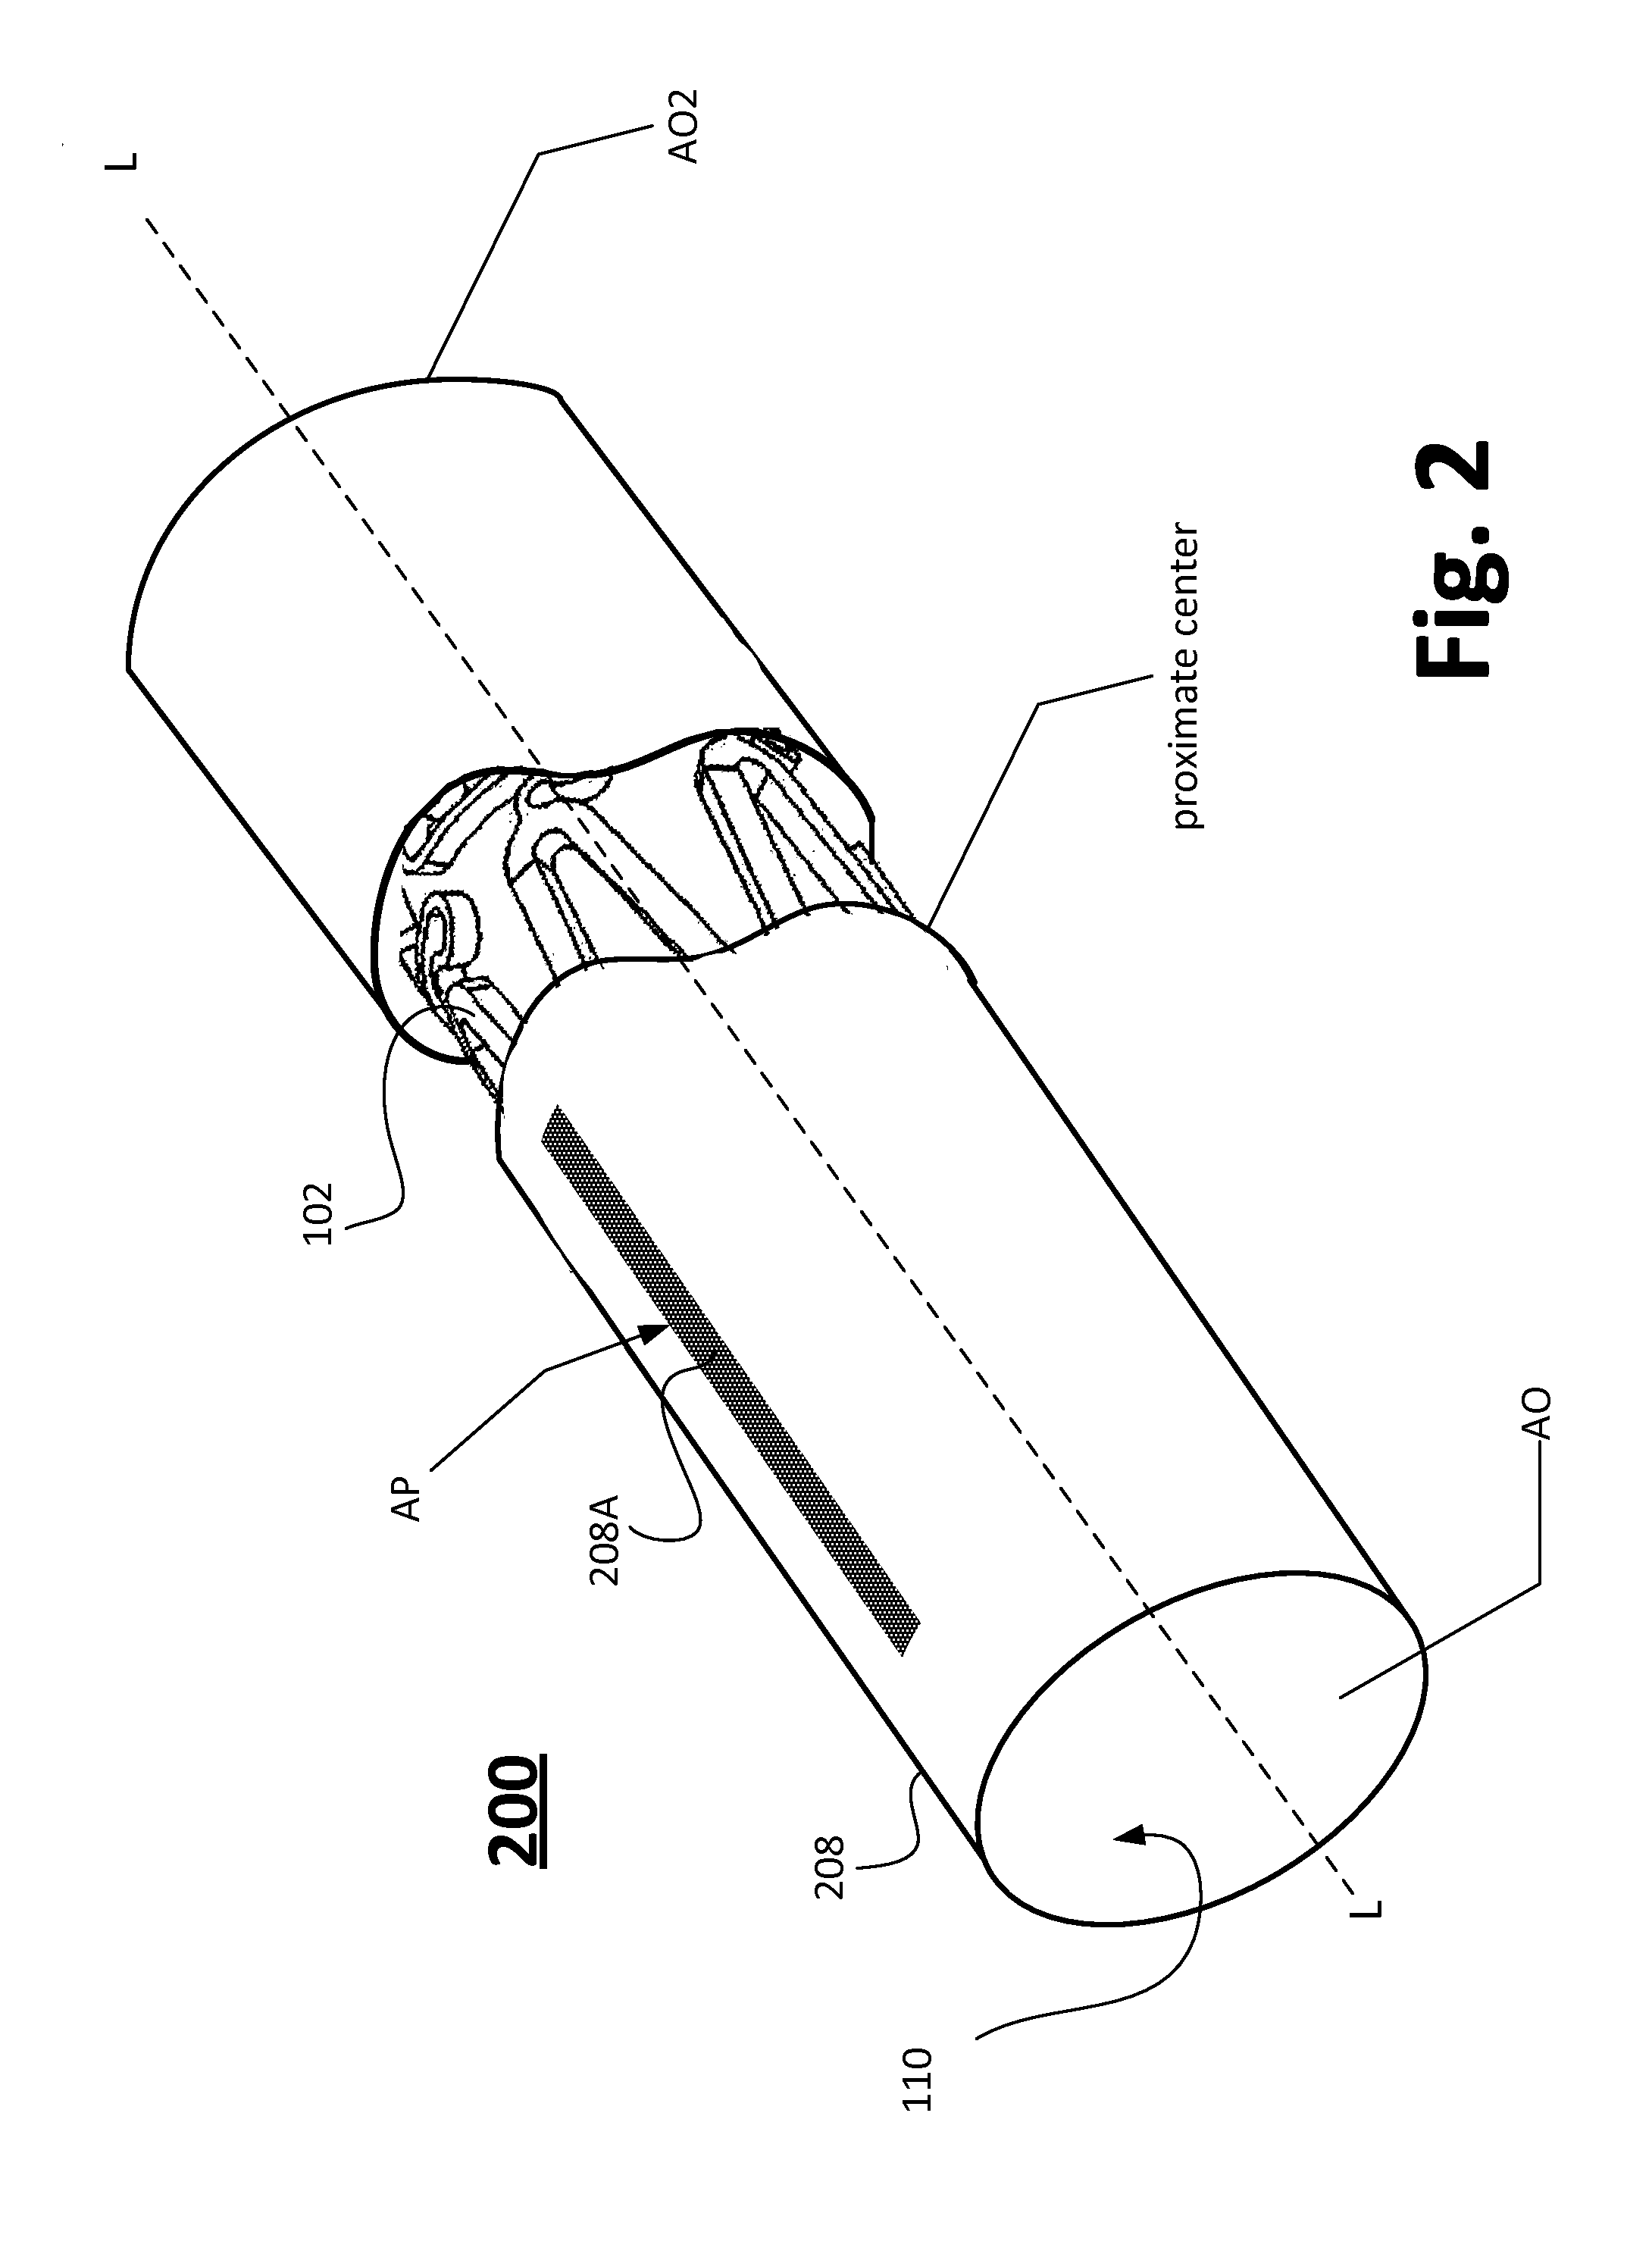 Targeted perforations in endovascular device